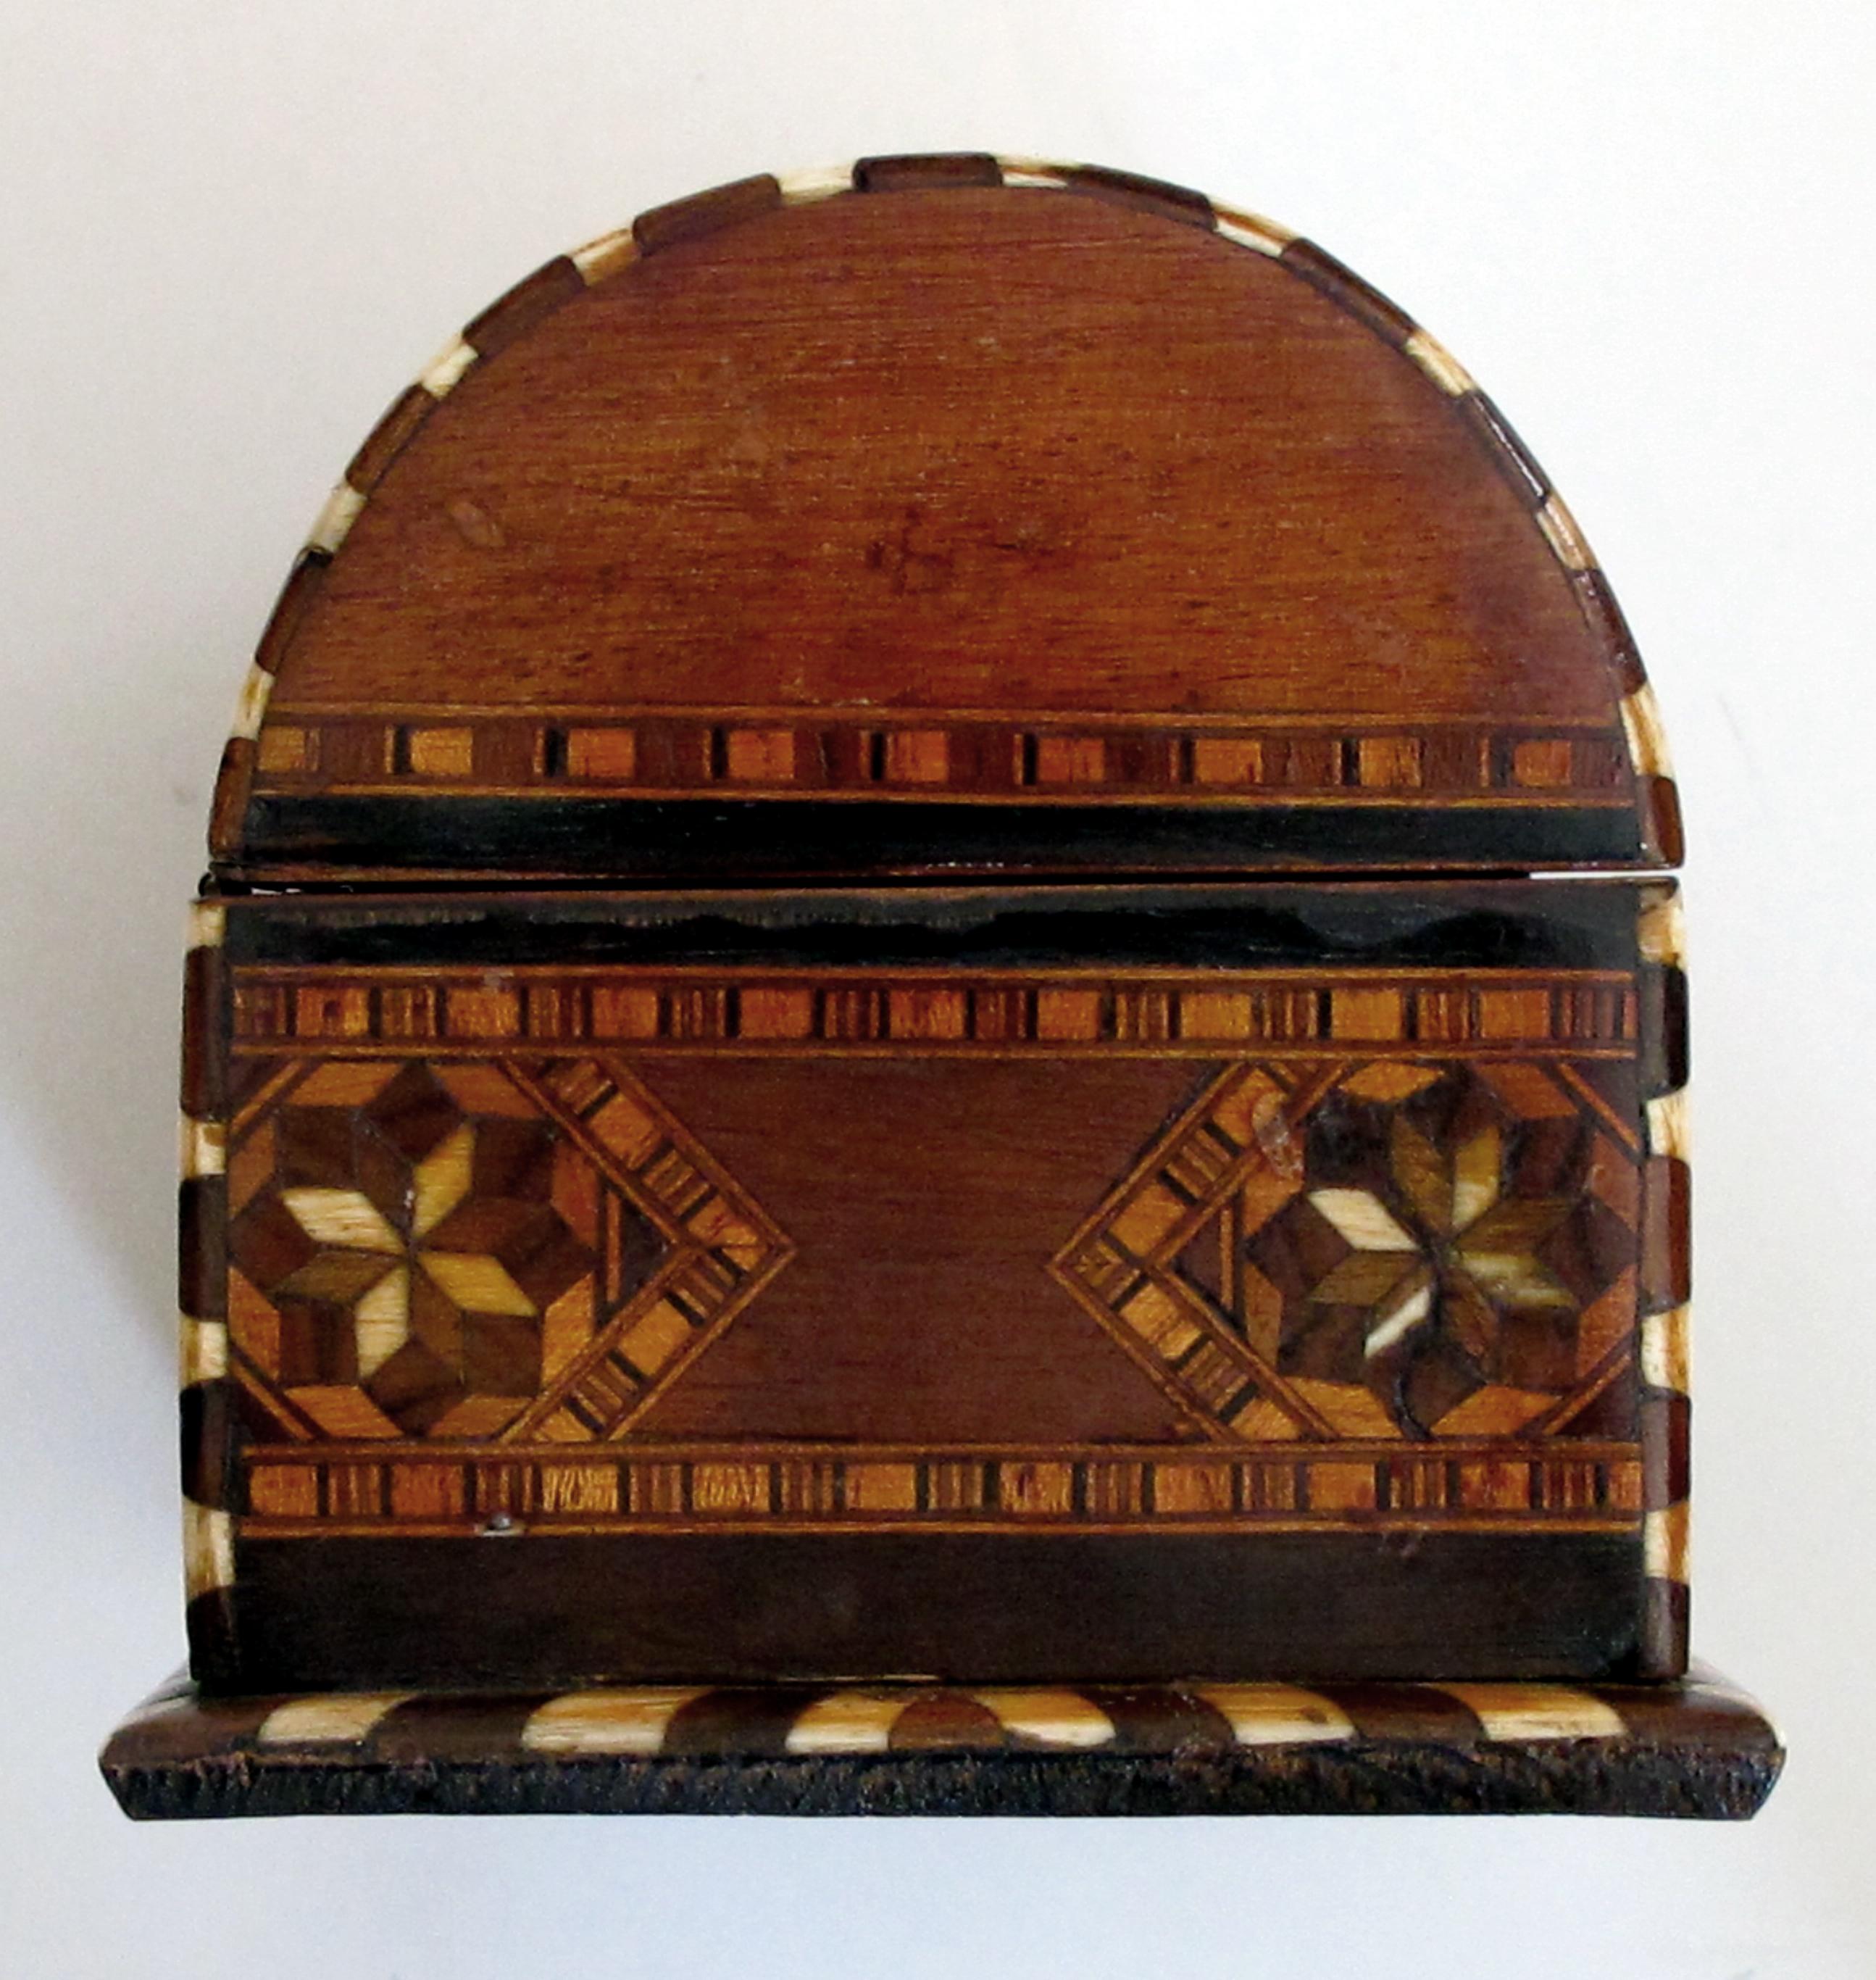 Early 20th Century Well-Crafted and Richly-Patinated Syrian Inlaid Trinket Box with Domed Lid